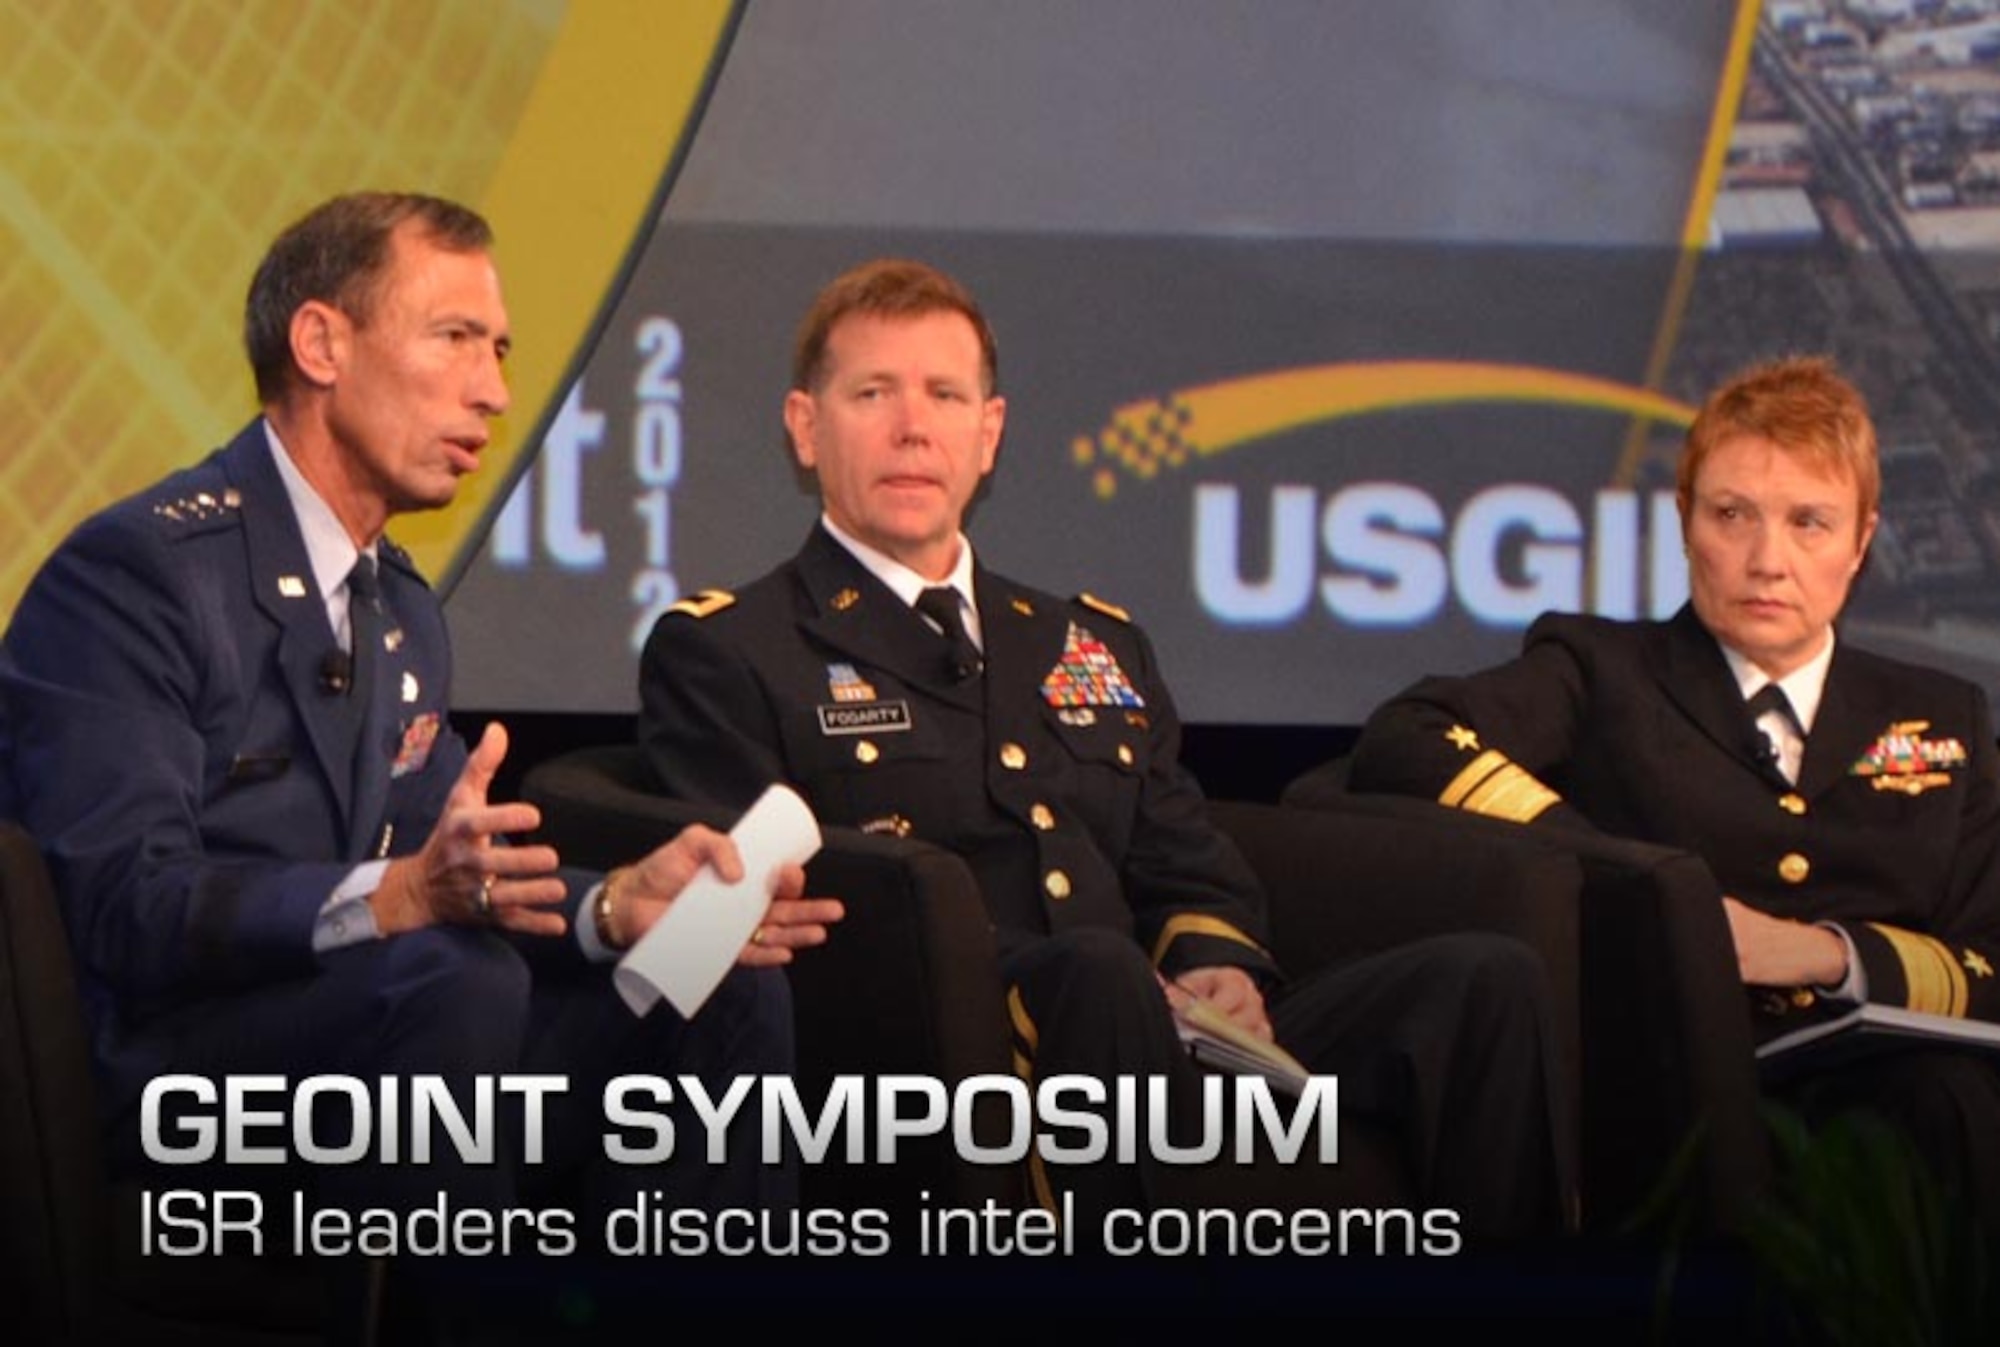 Lt. Gen. Larry James (left) addresses attendees at the 2012 GEOINT Symposium, Oct. 11 here. James, the Air Force deputy chief of Intelligence, Surveillance and Reconnaissance, was joined by Maj. Gen. Steve Fogarty (center), commanding general of U.S. Army Intelligence and Security Command; Rear Adm. Sandy Daniels (right), Senior Advisor for Space to the Deputy Chief of Naval Operations for Information Dominance and Phillip C. Chuboda (not pictured), assistant director of intelligence for the U.S. Marine Corps. (U.S. Air Force photo by Susan A. Romano)